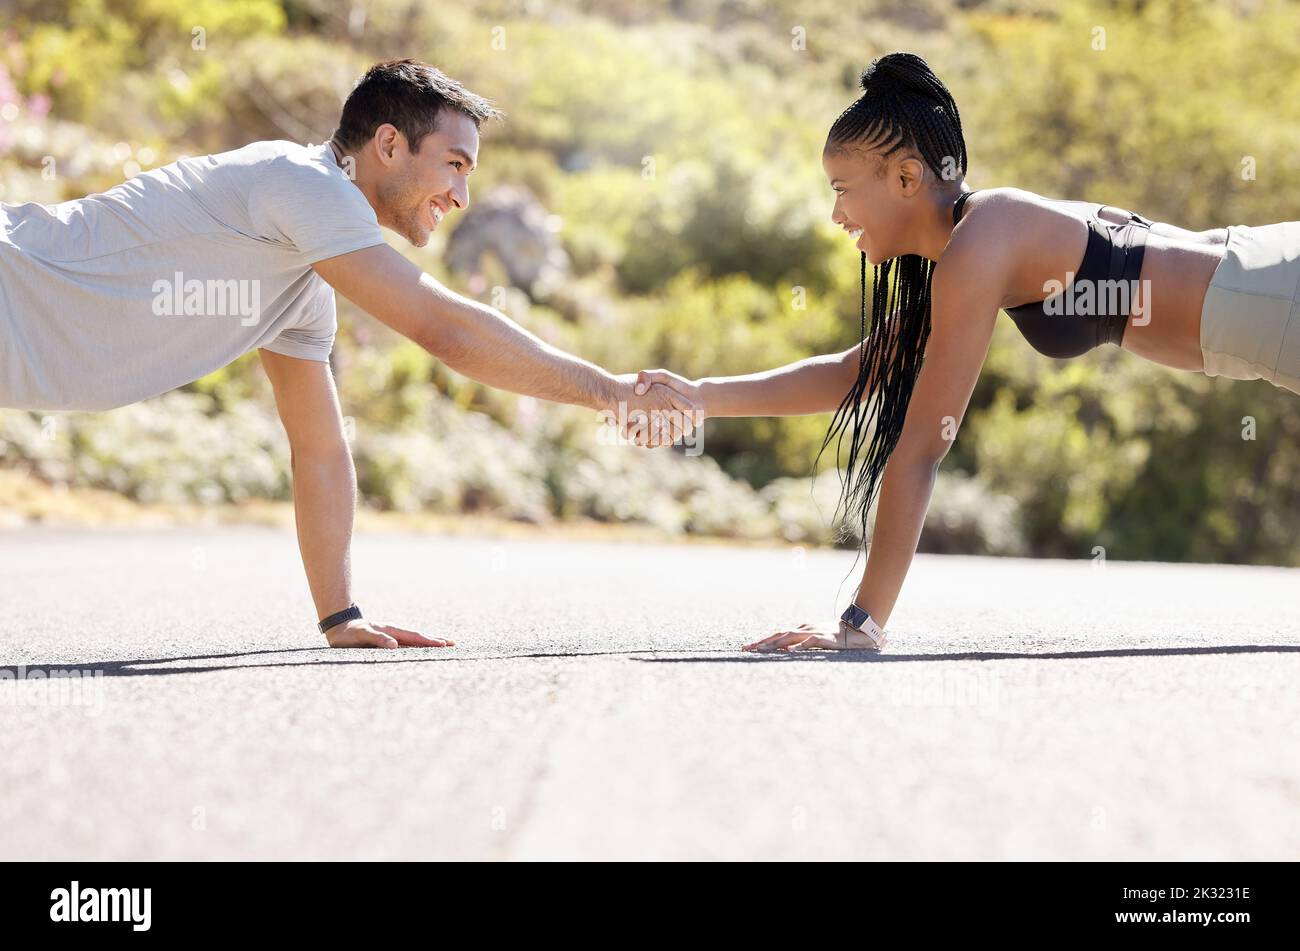 Motivation, fitness and handshake by exercise partnership deal with athletic couple shaking hands in workout challenge outdoors. Friends, hands and Stock Photo